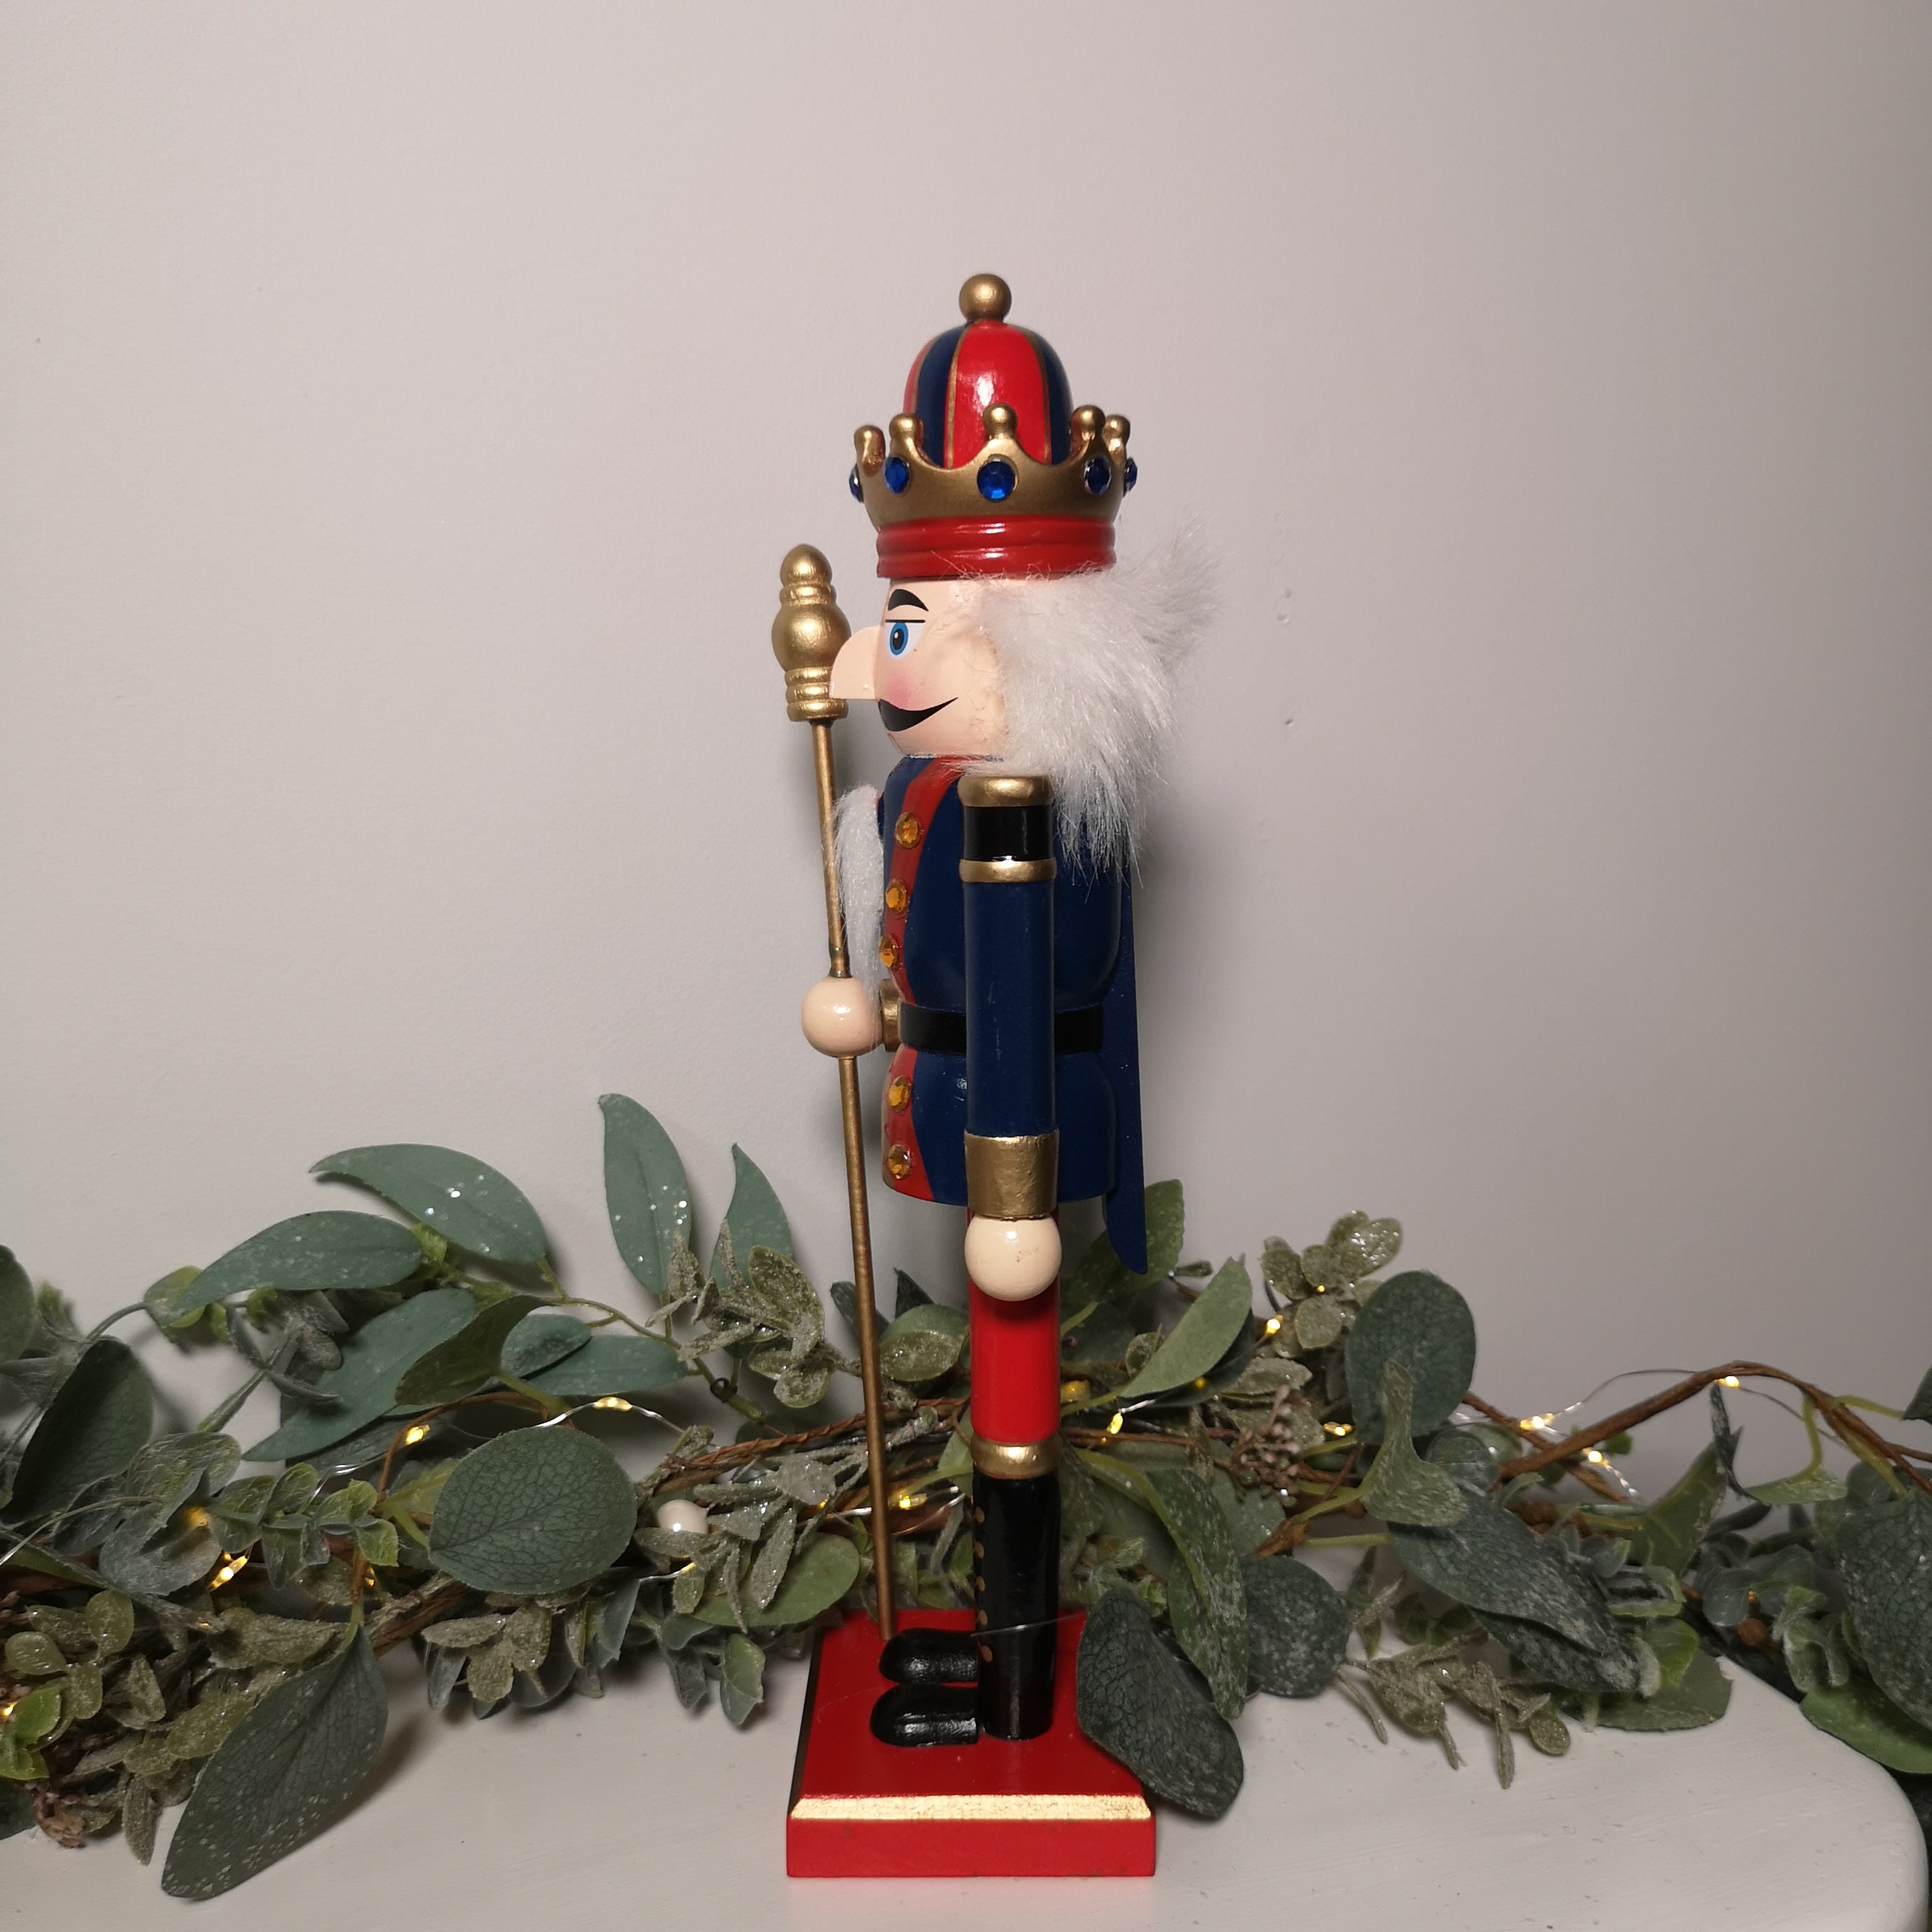 30cm Wooden Christmas Nutcracker Soldier Decoration with Blue Body